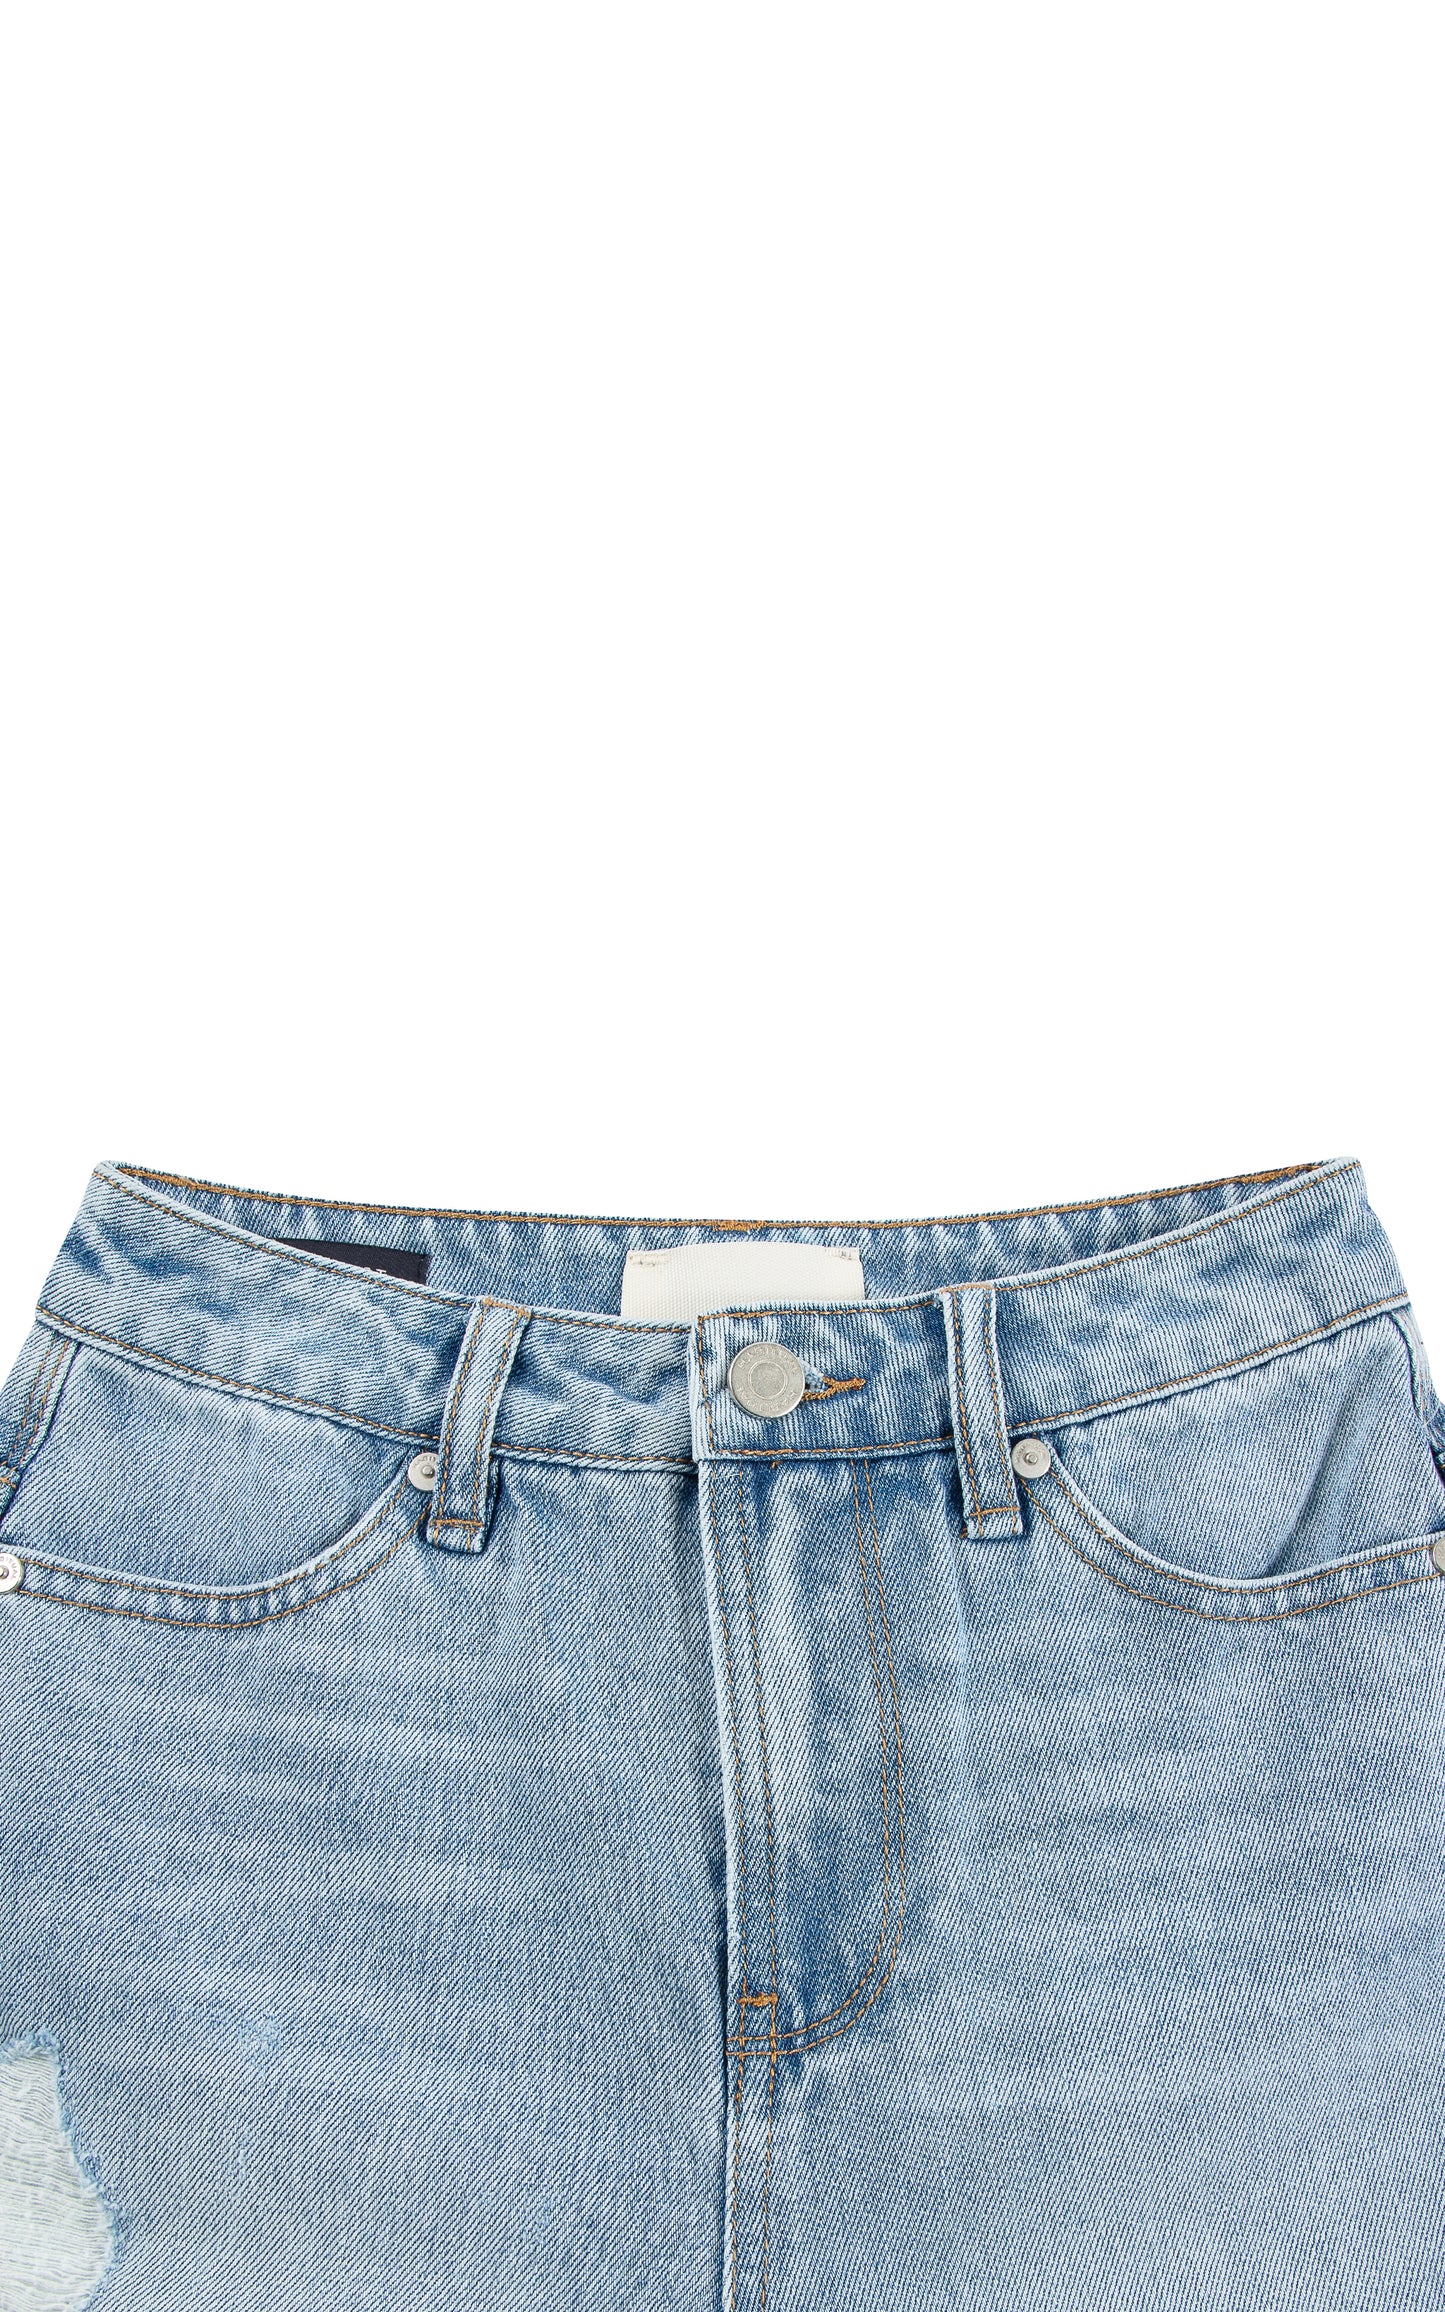 CLOSE UP OF LIGHT BLUE WASH DENIM CUT OFF SHORTS WITH ROLLED HEM AND SLIGHT DISTRESSING